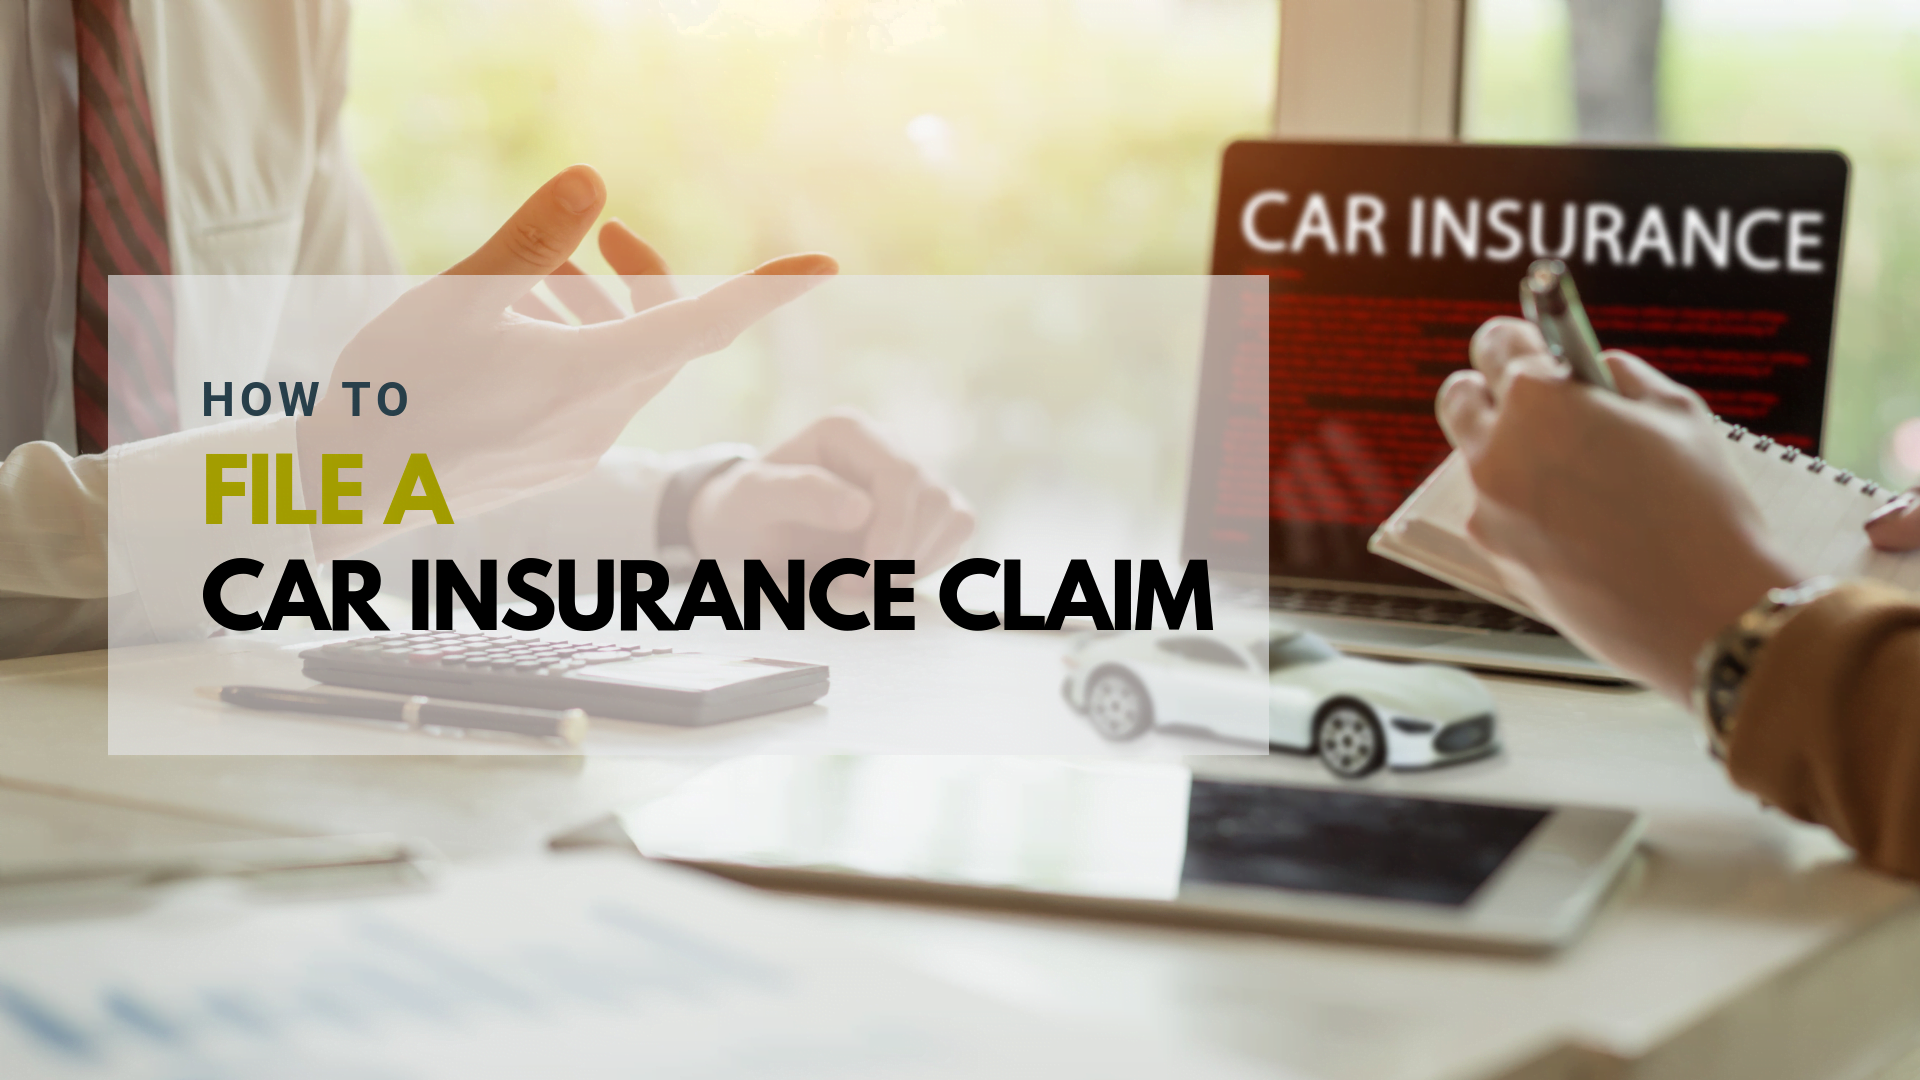 Useful tips on how to file a car insurance claim